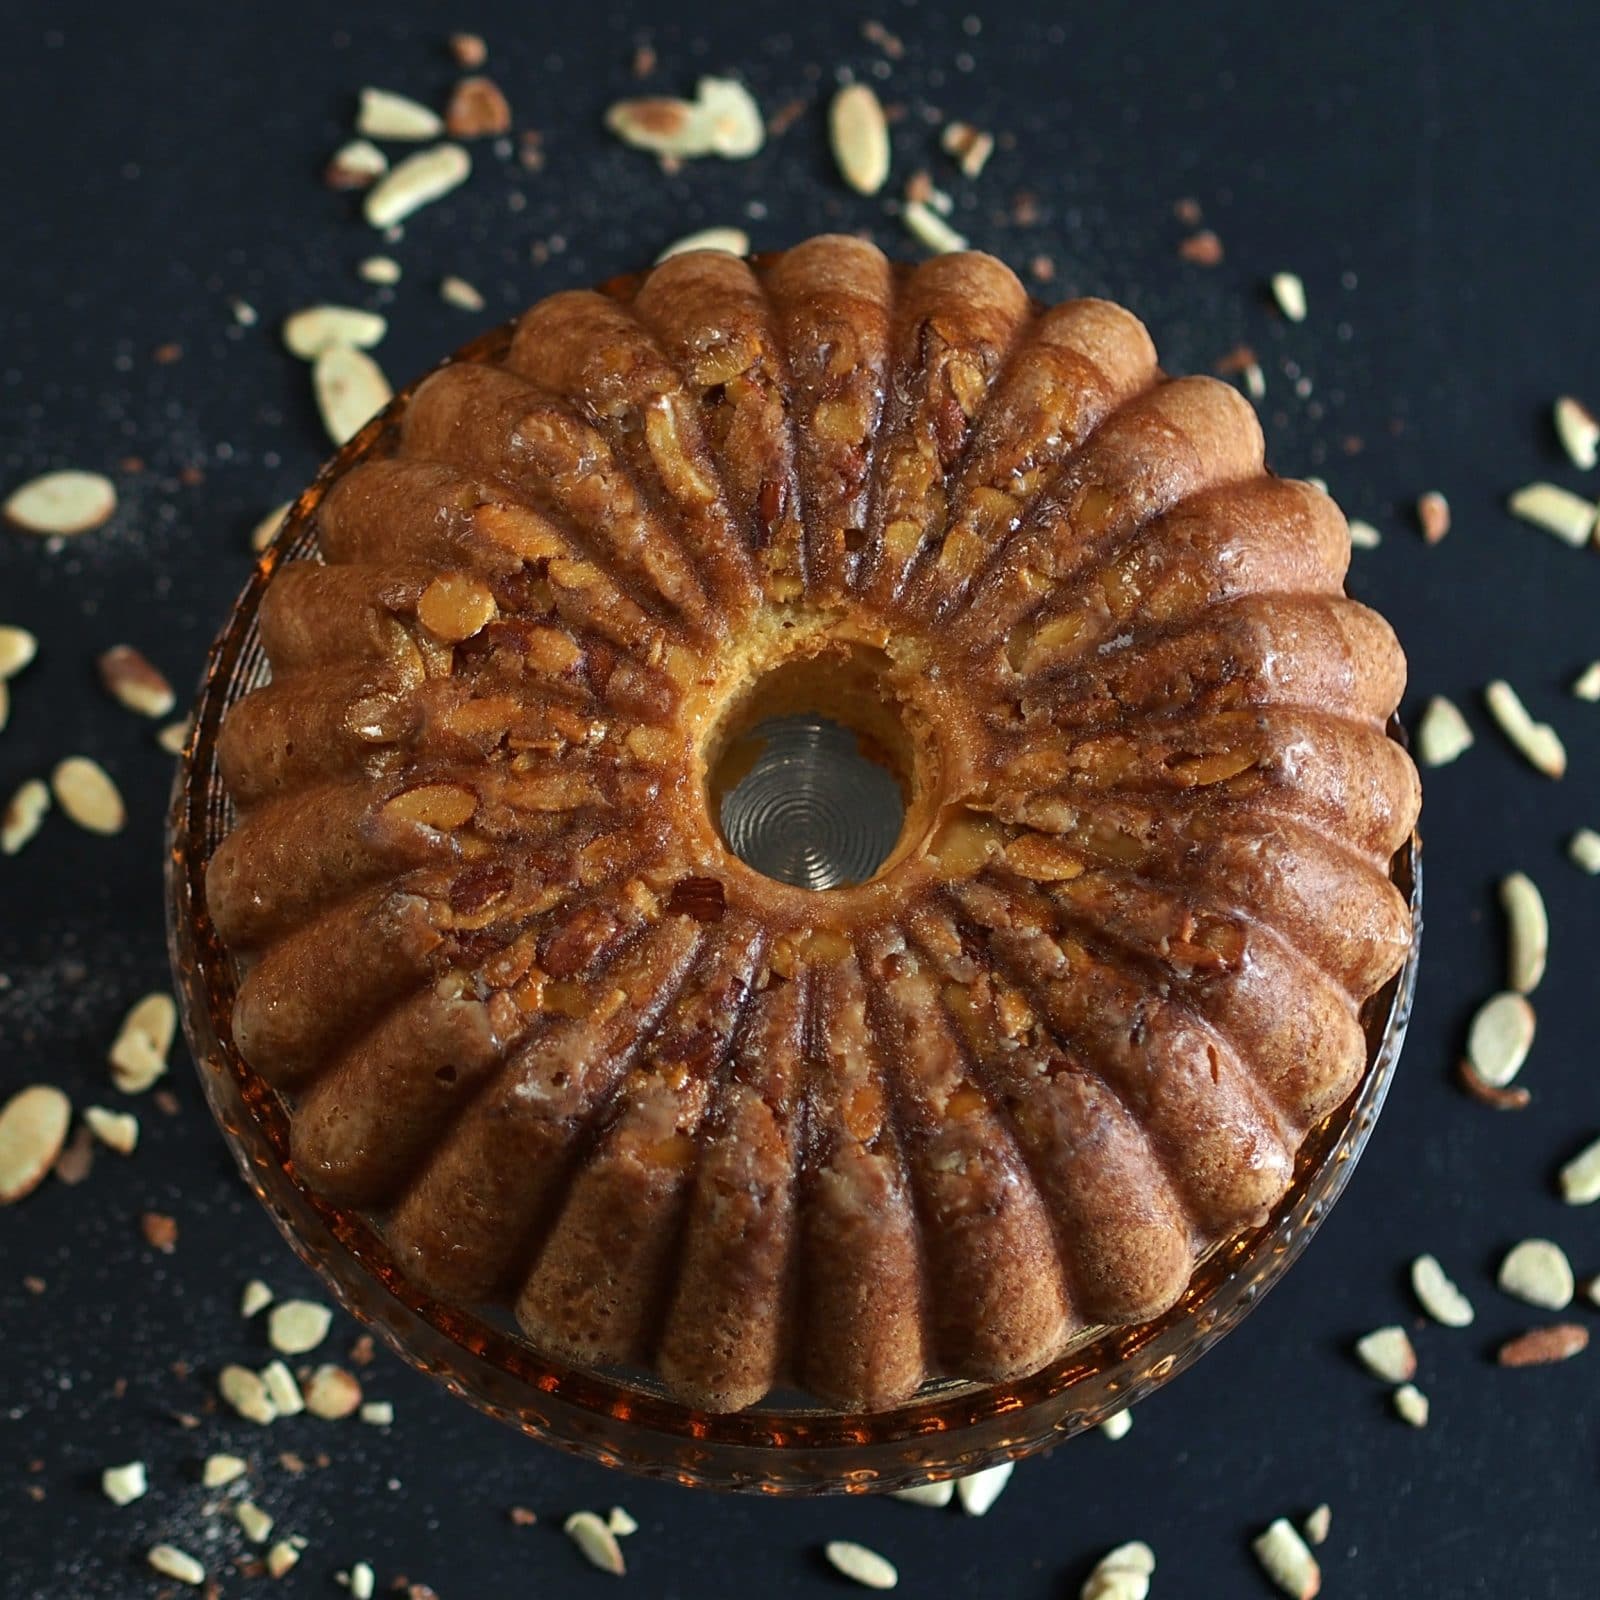 Amazing Amaretto Pound Cake - three-almond pound cake drizzled with Amaretto Glaze and topped with toasted almonds. Perfection! Simply Sated